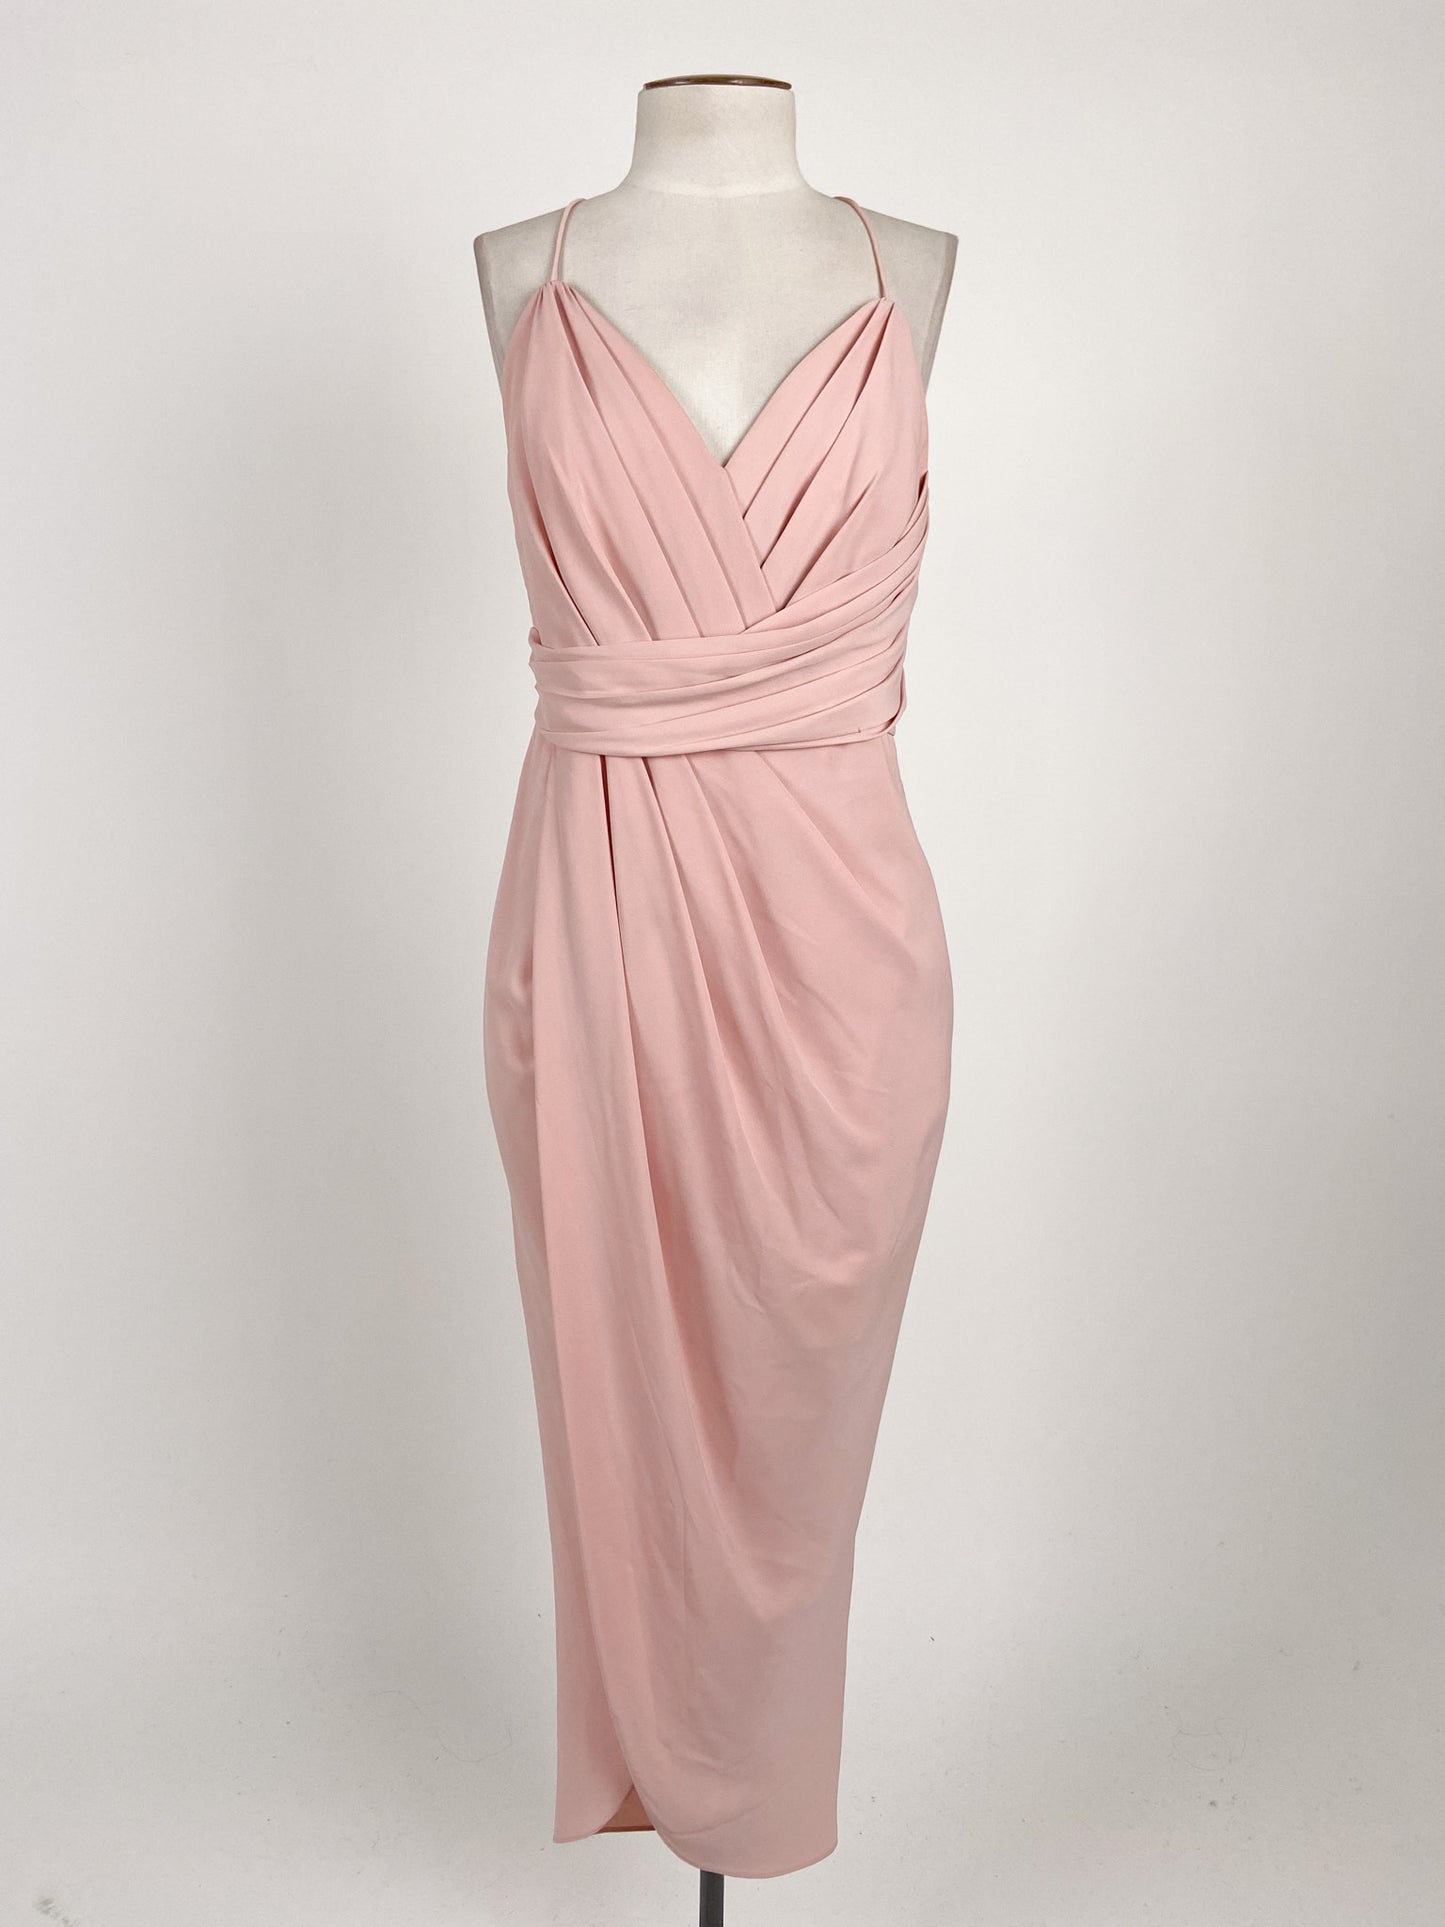 Forever New | Pink Formal Dress | Size 10